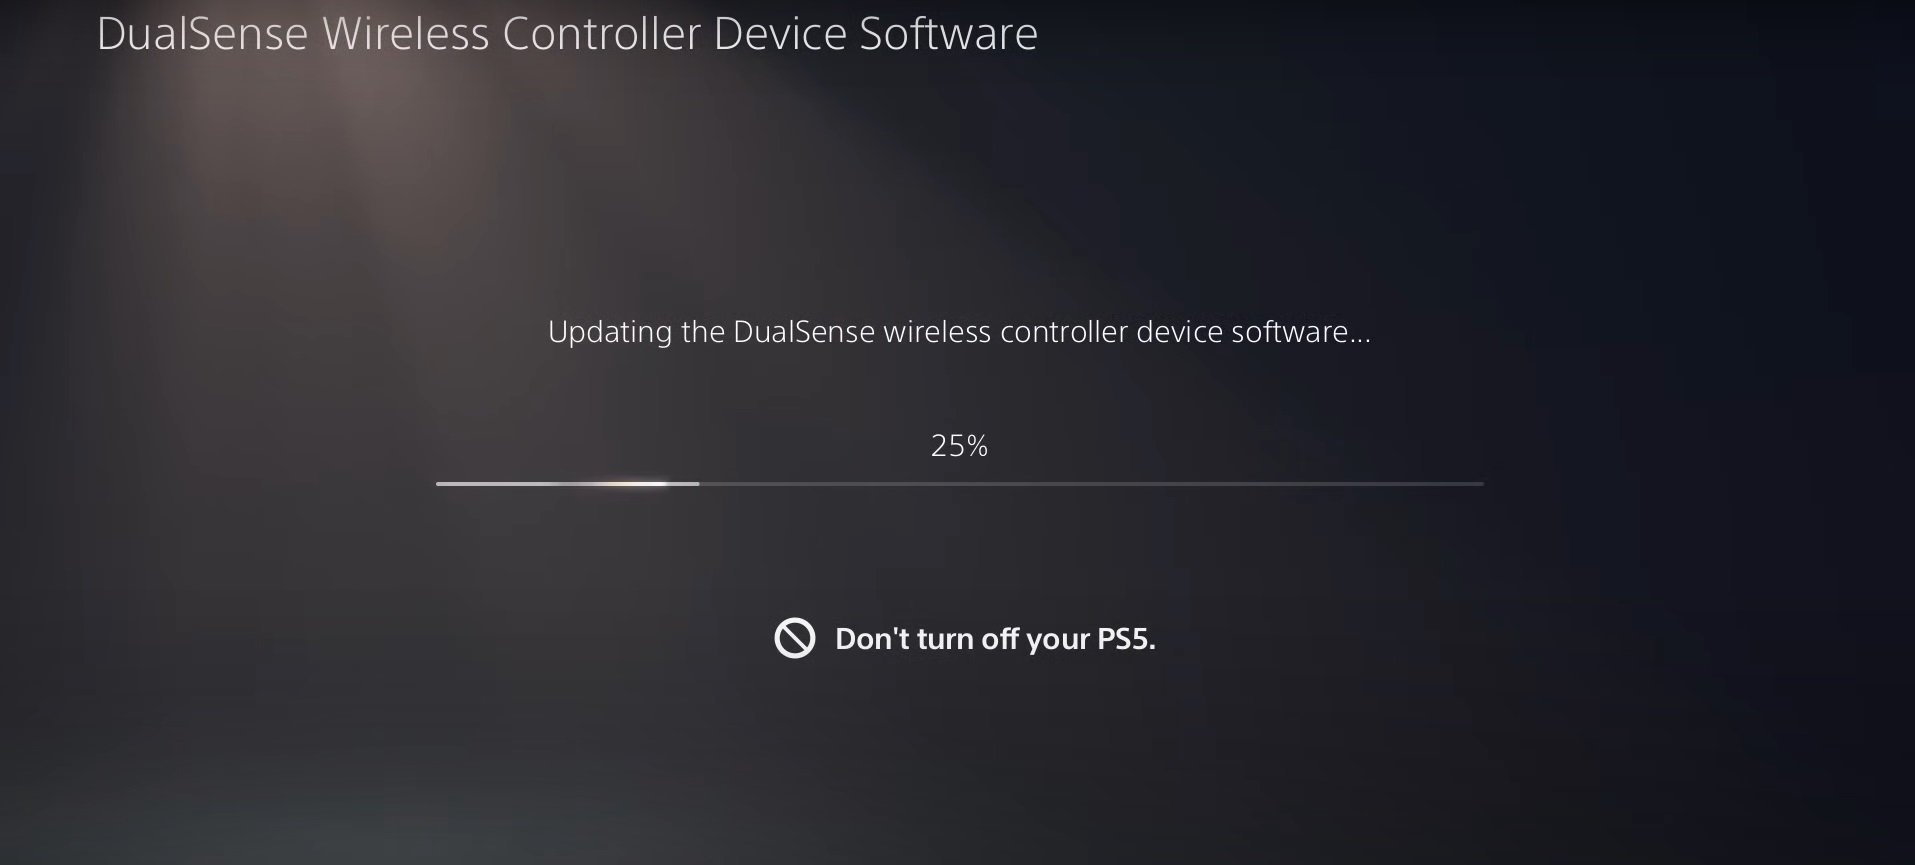 Updating the wireless controller device software